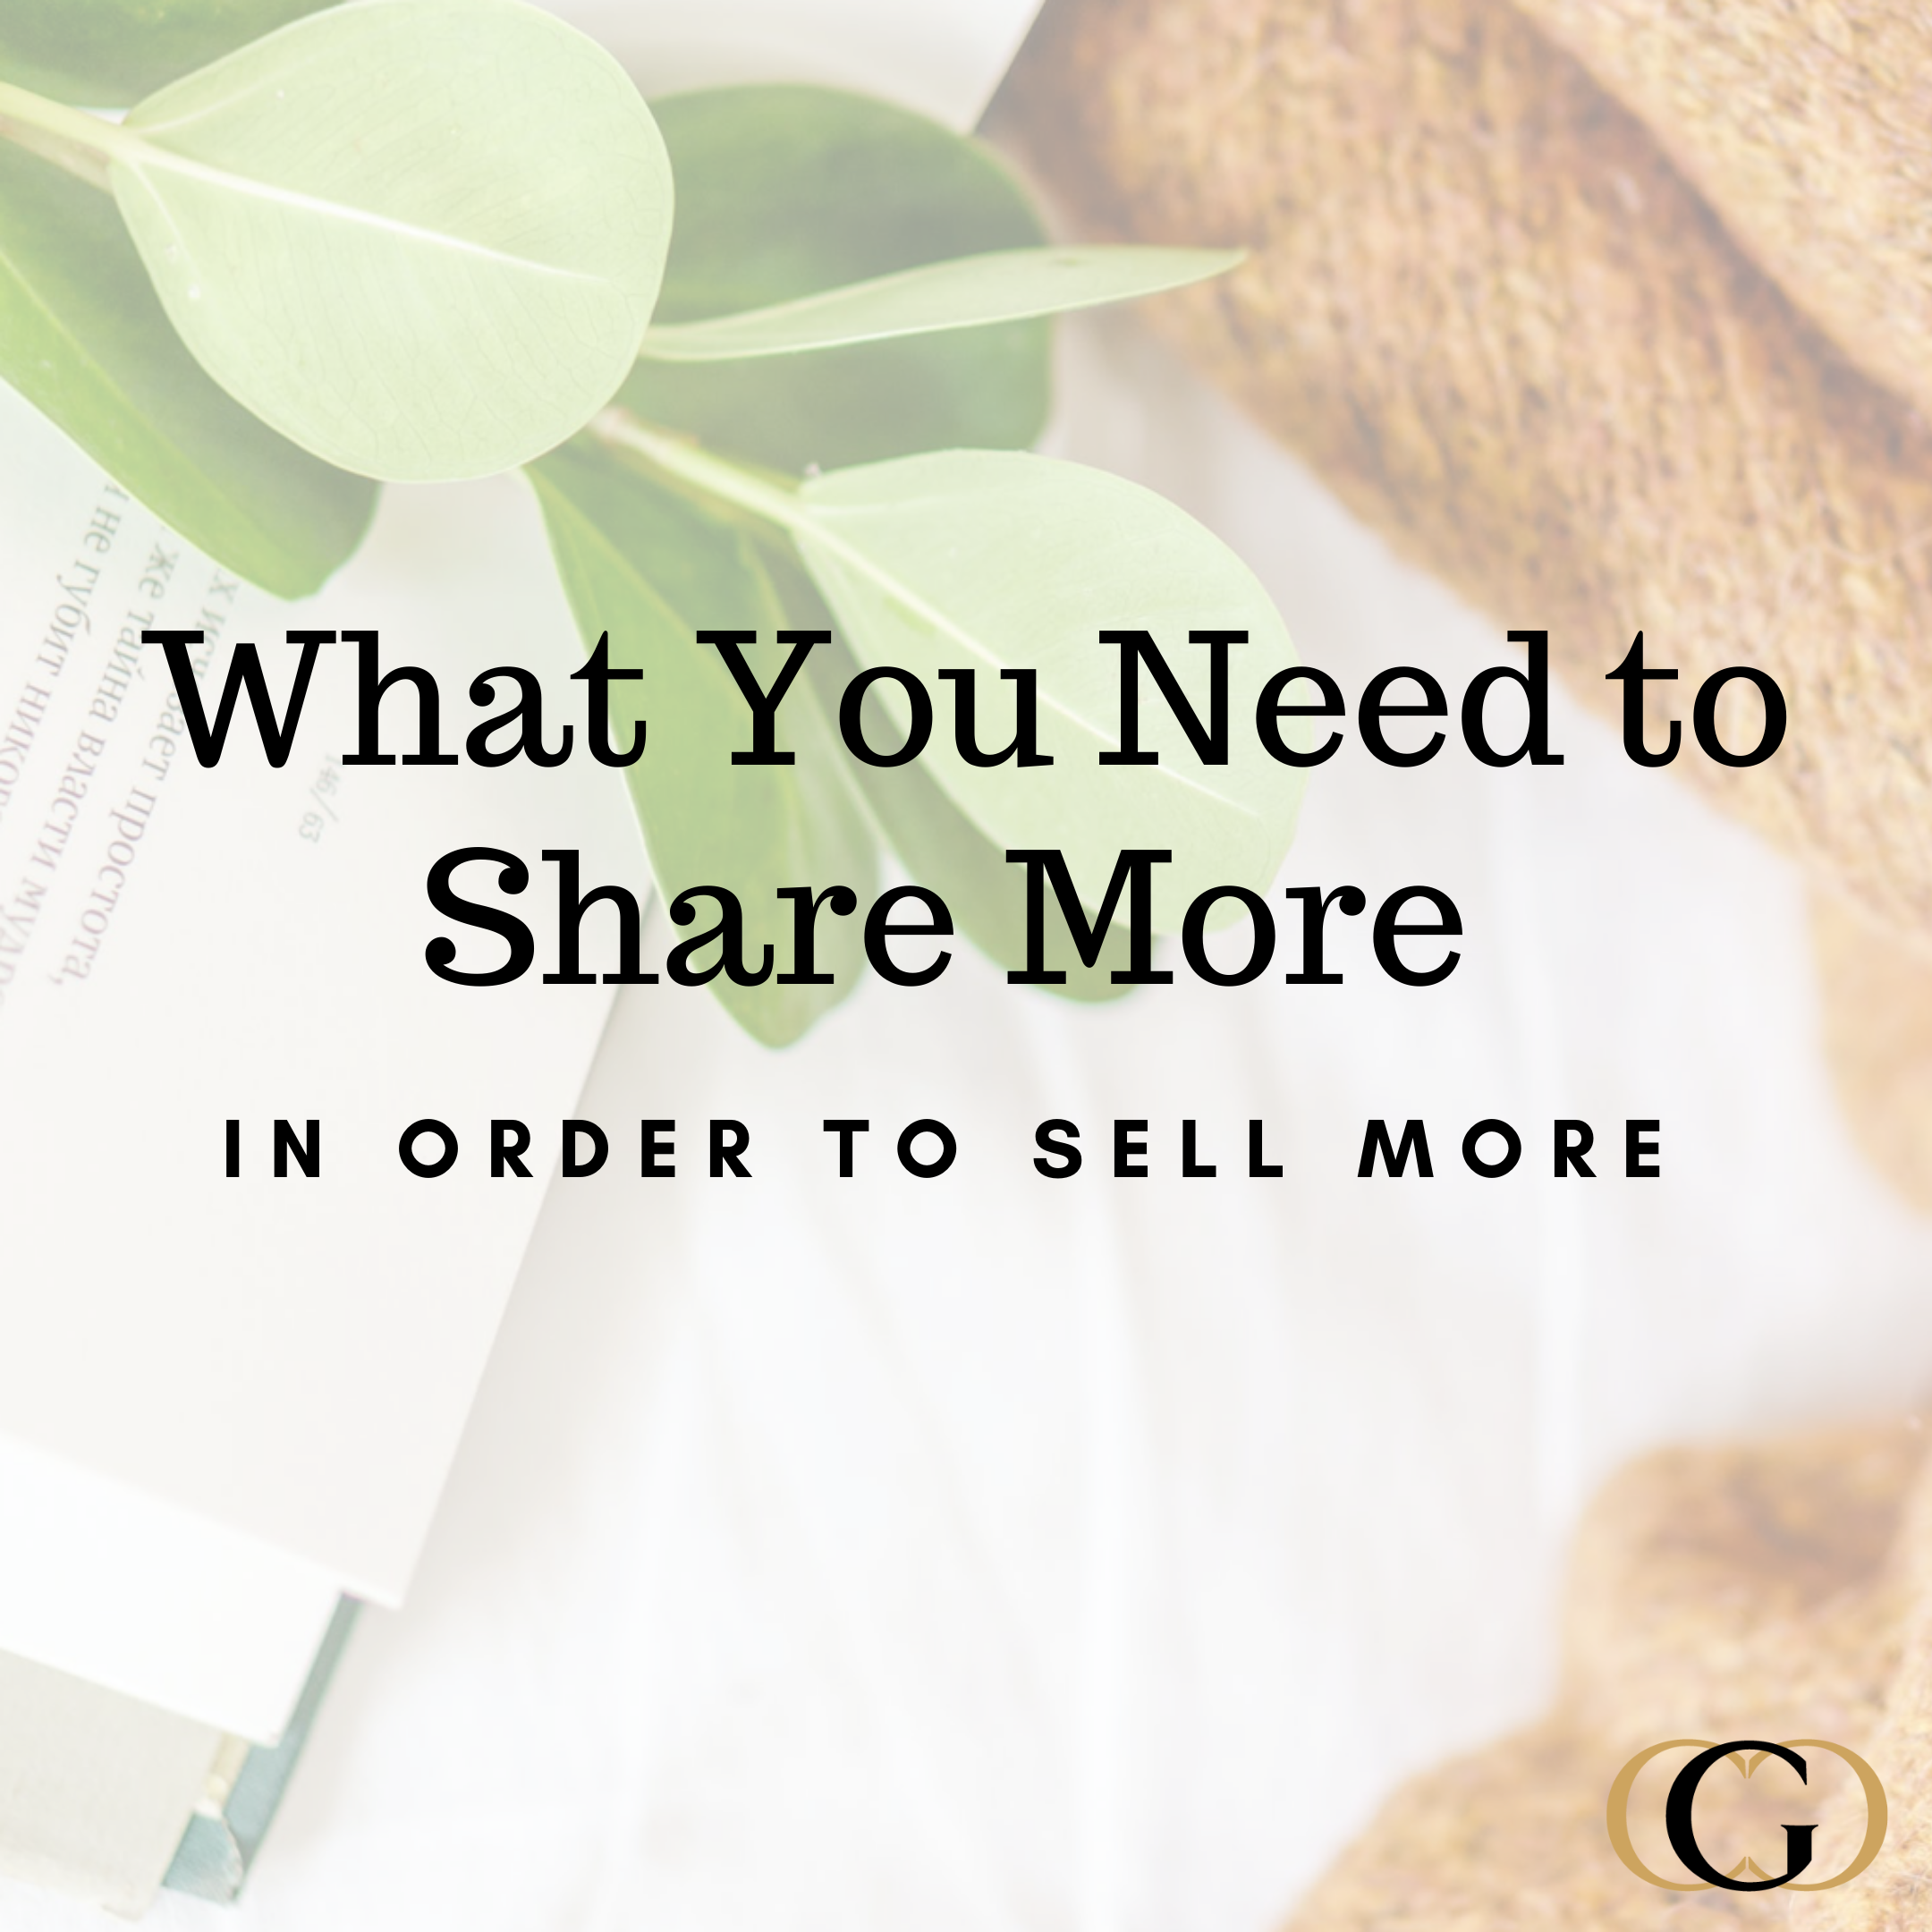 What You Need to Share More in order to Sell More